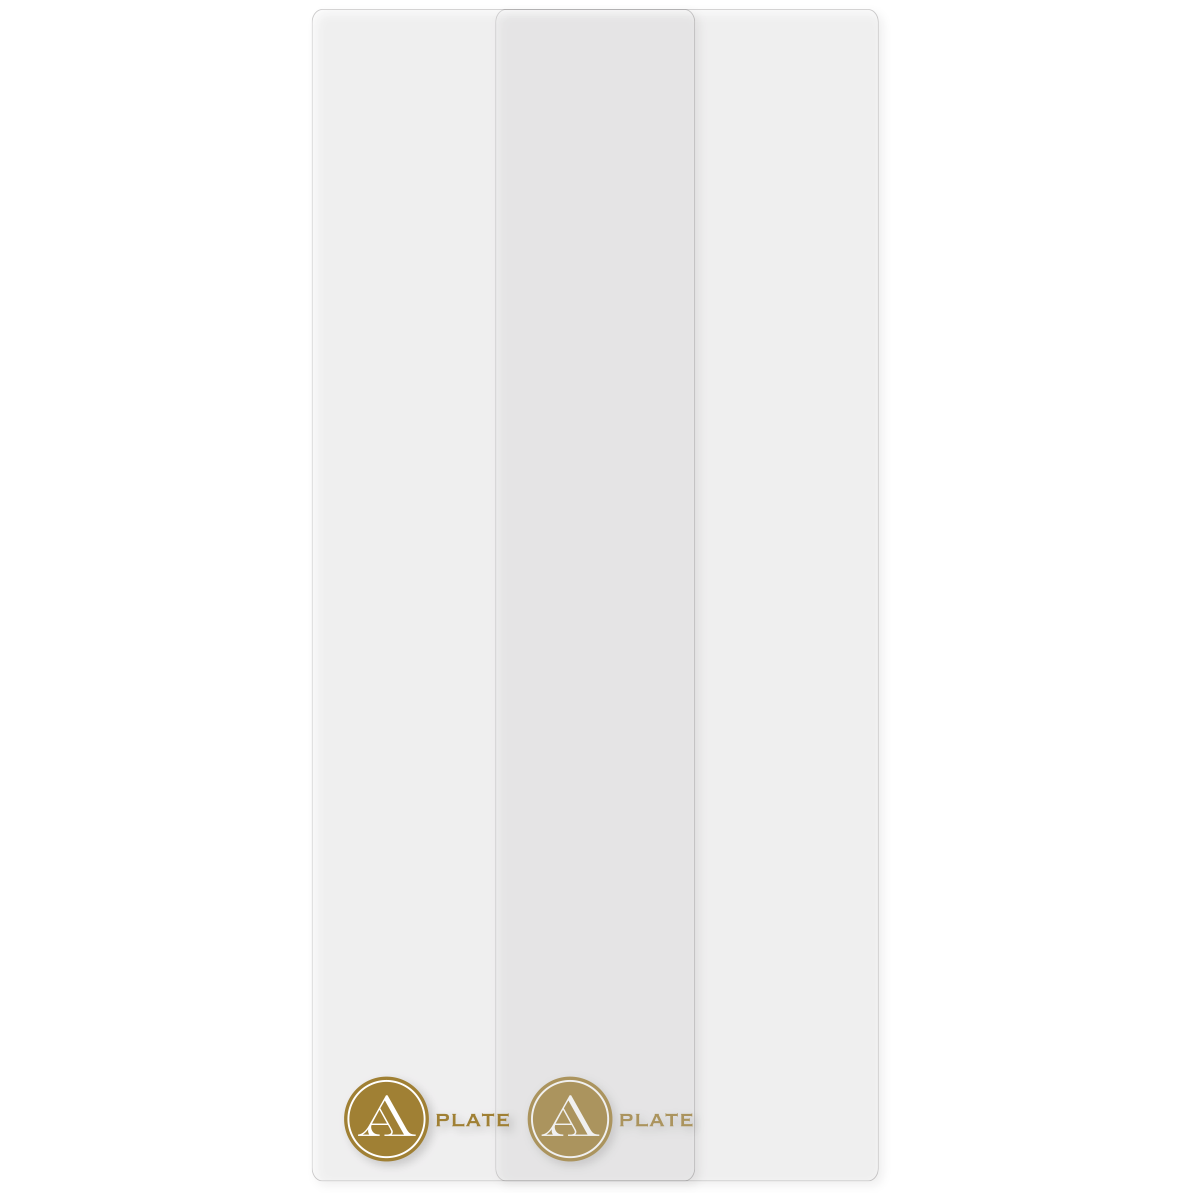 a white door with a gold emblem on it.